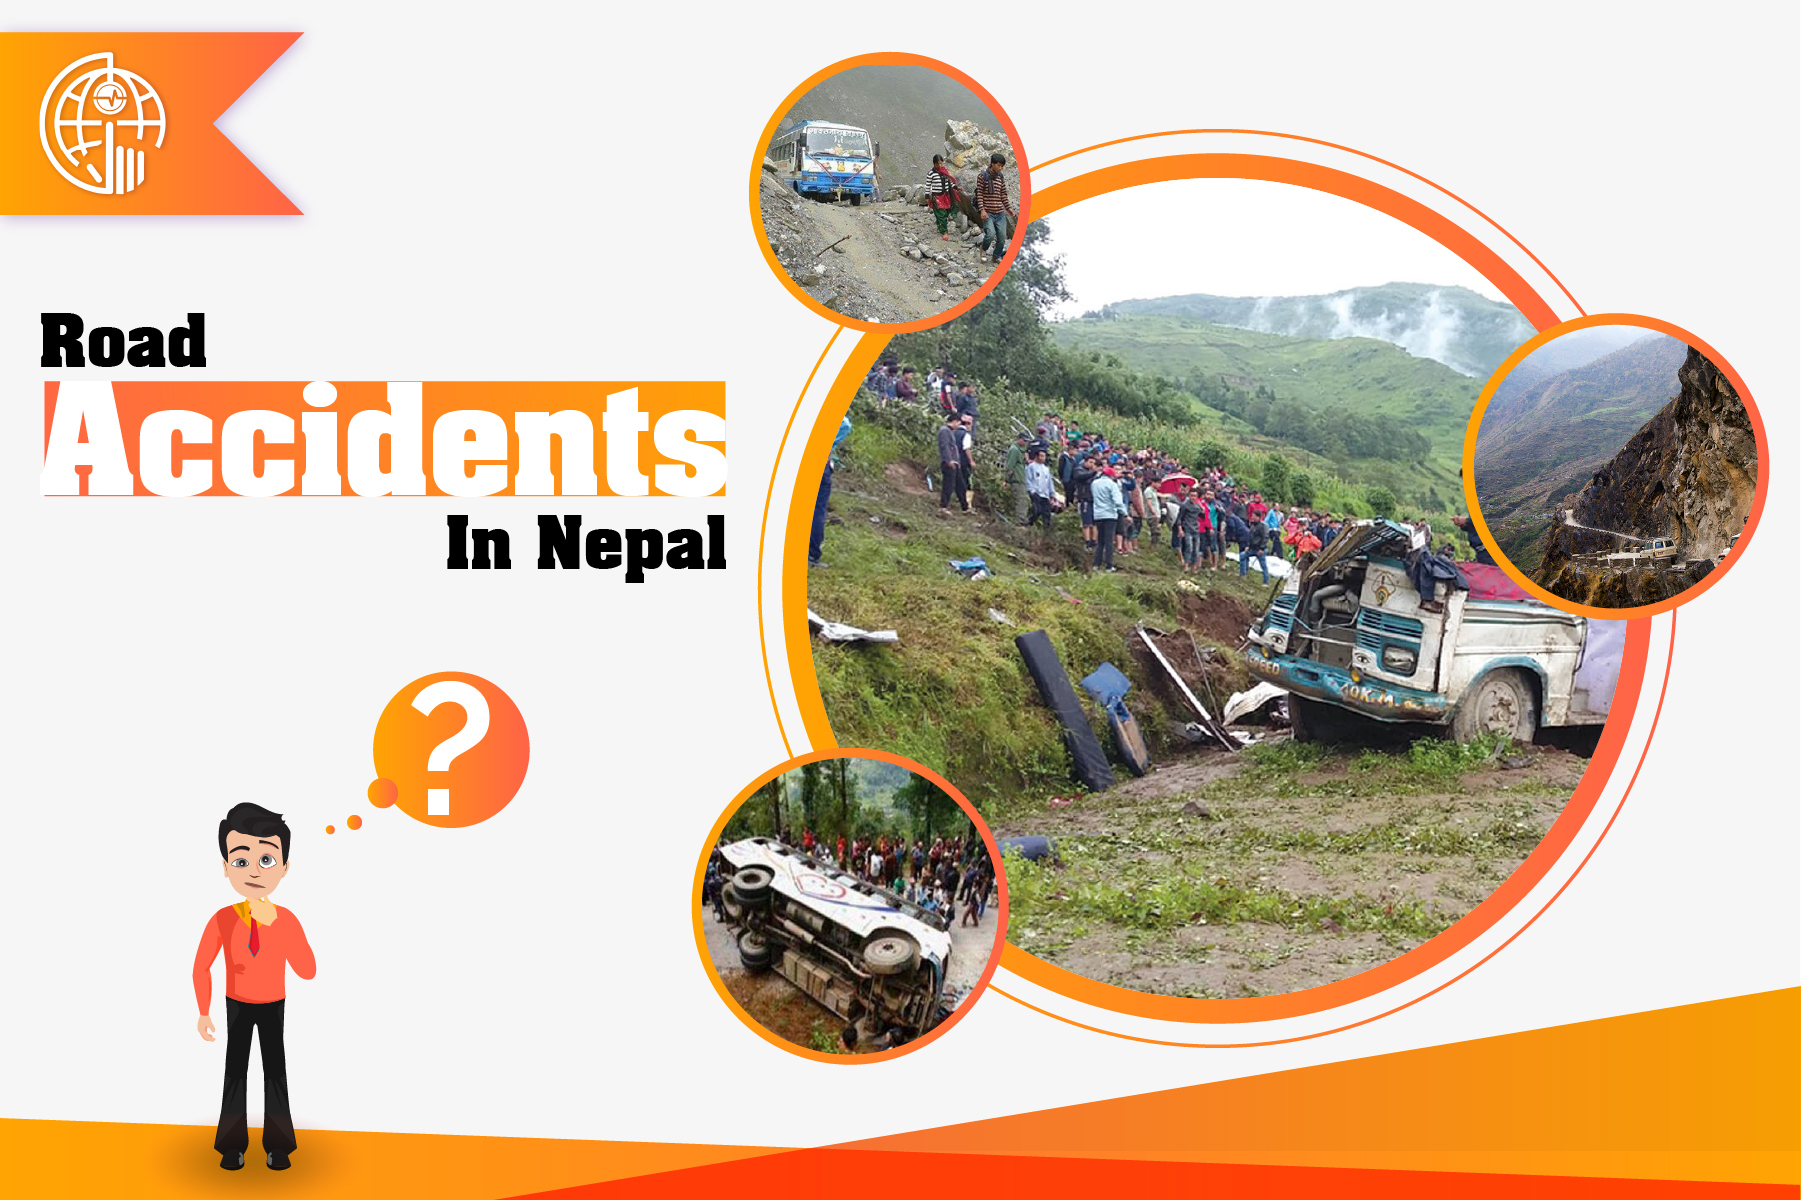 What do you have to say about road accidents in Nepal?